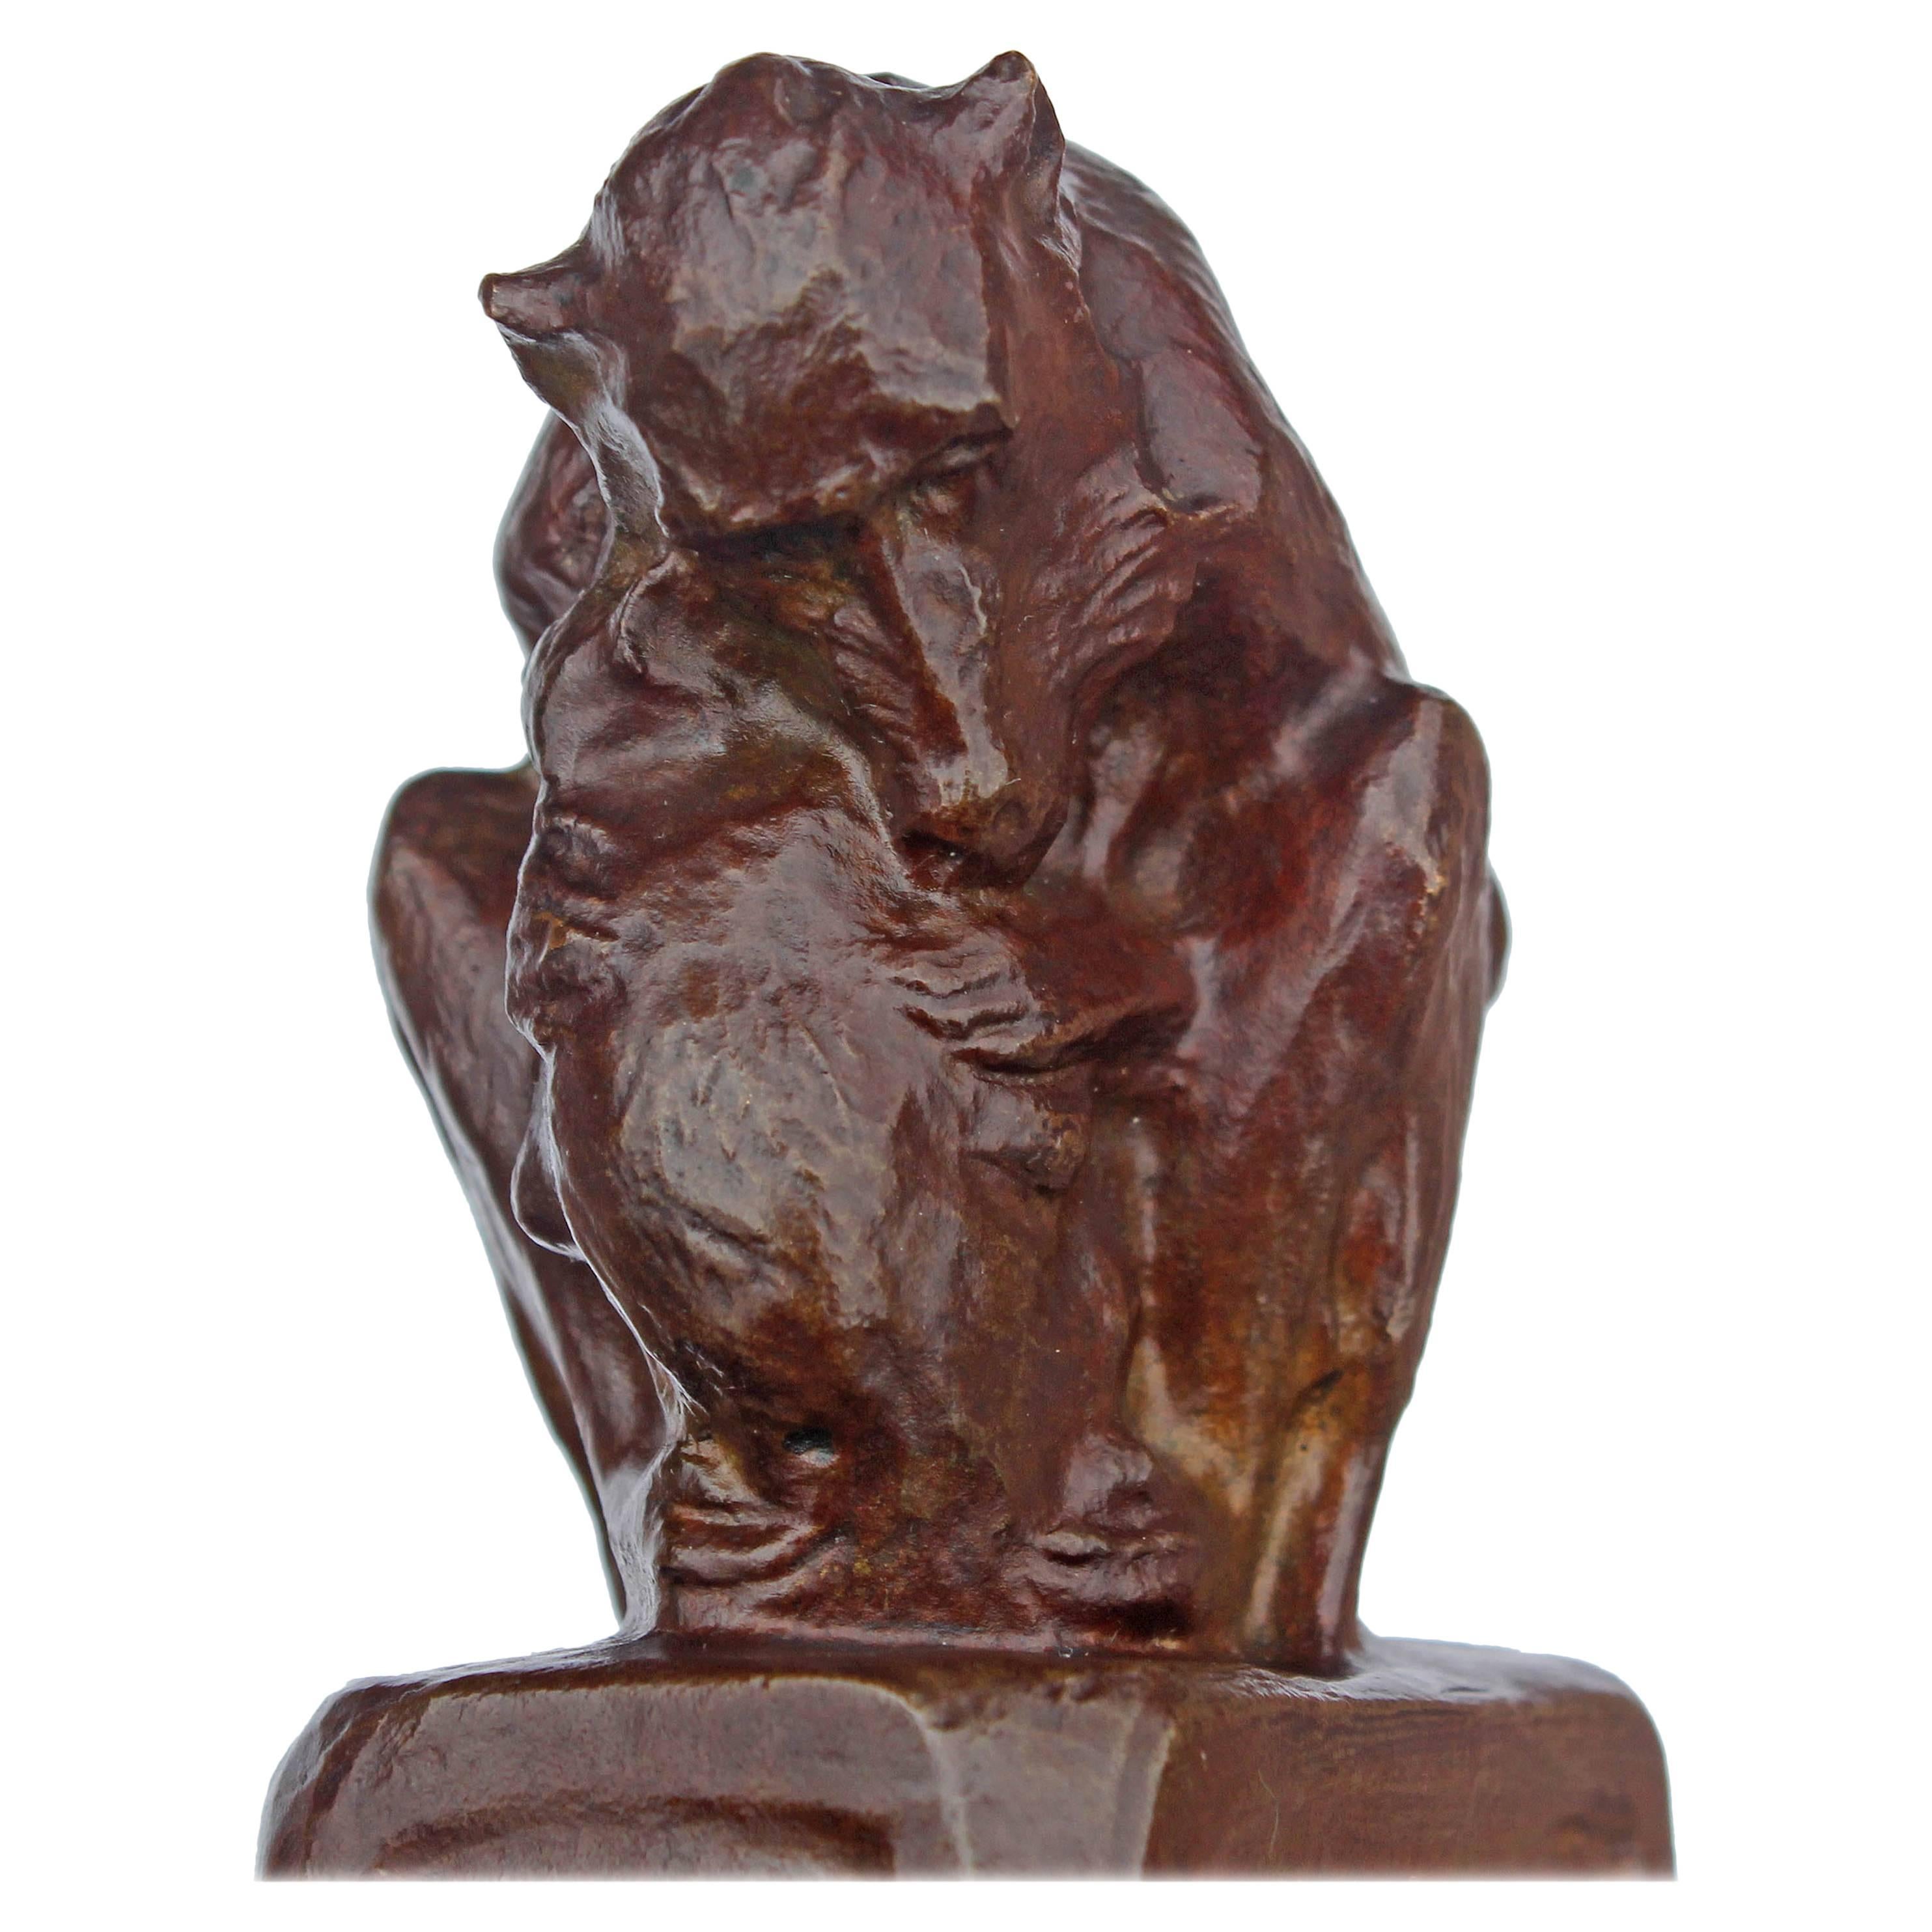   Bronze Sculpture " Mother and Child" Baboons